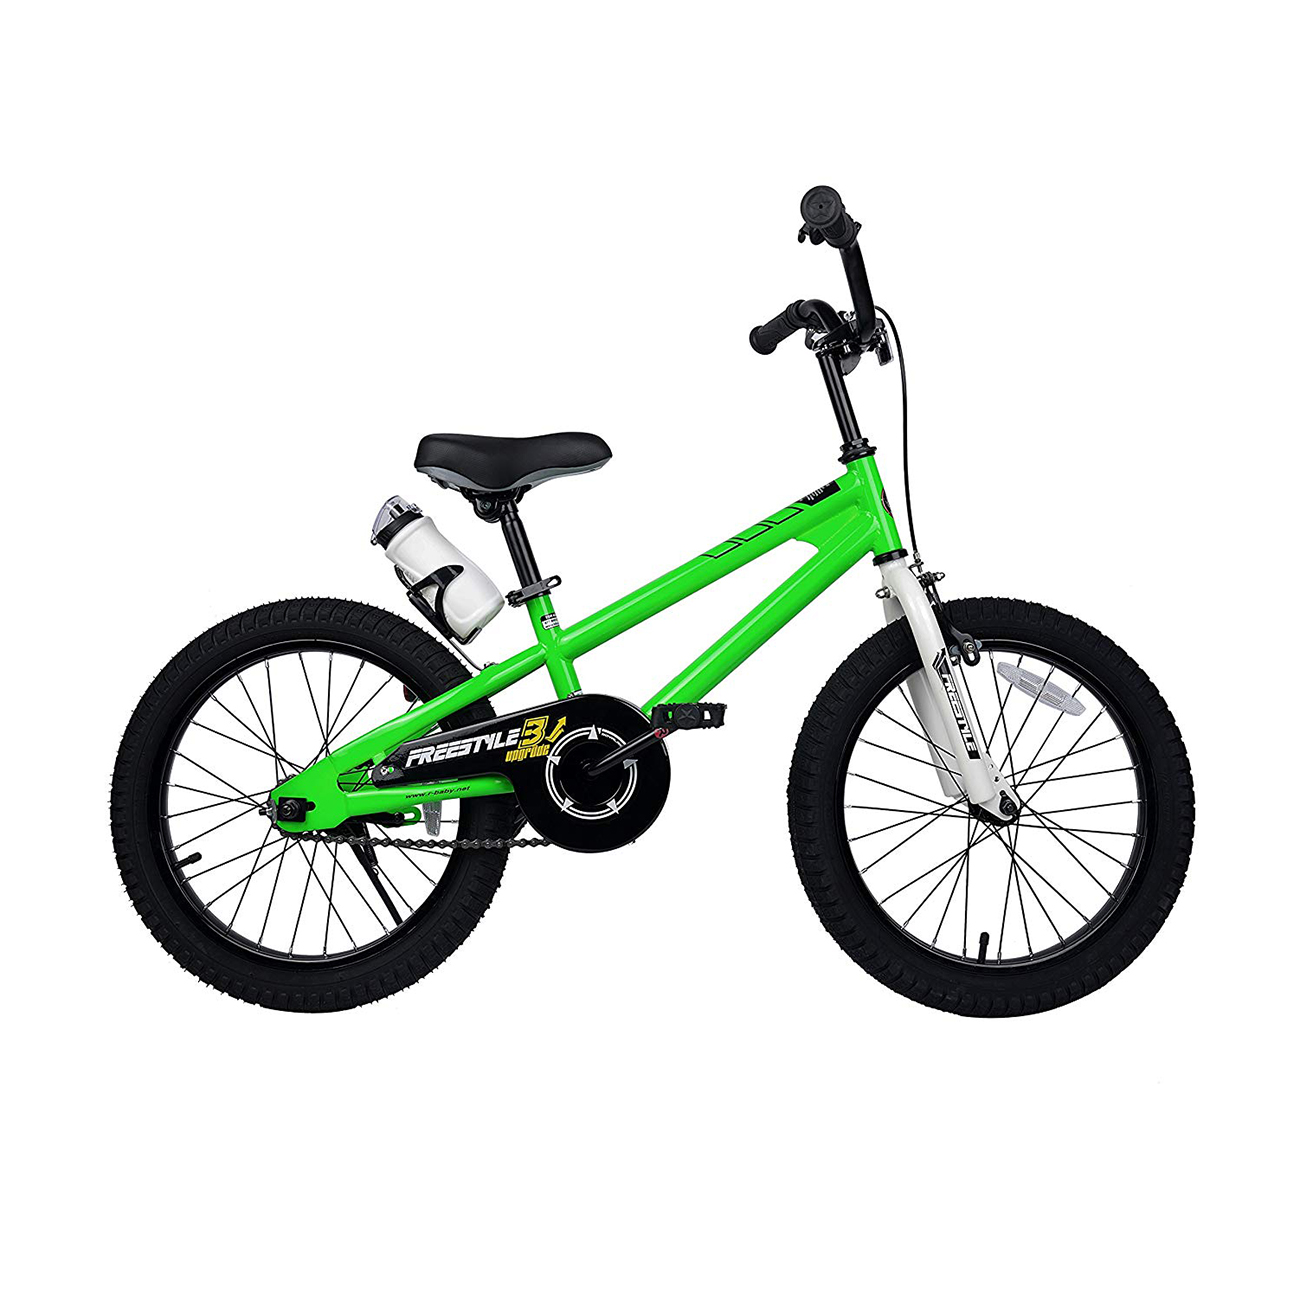 ROYAL BABY Freestyle 18" (2019) Action-Bikes